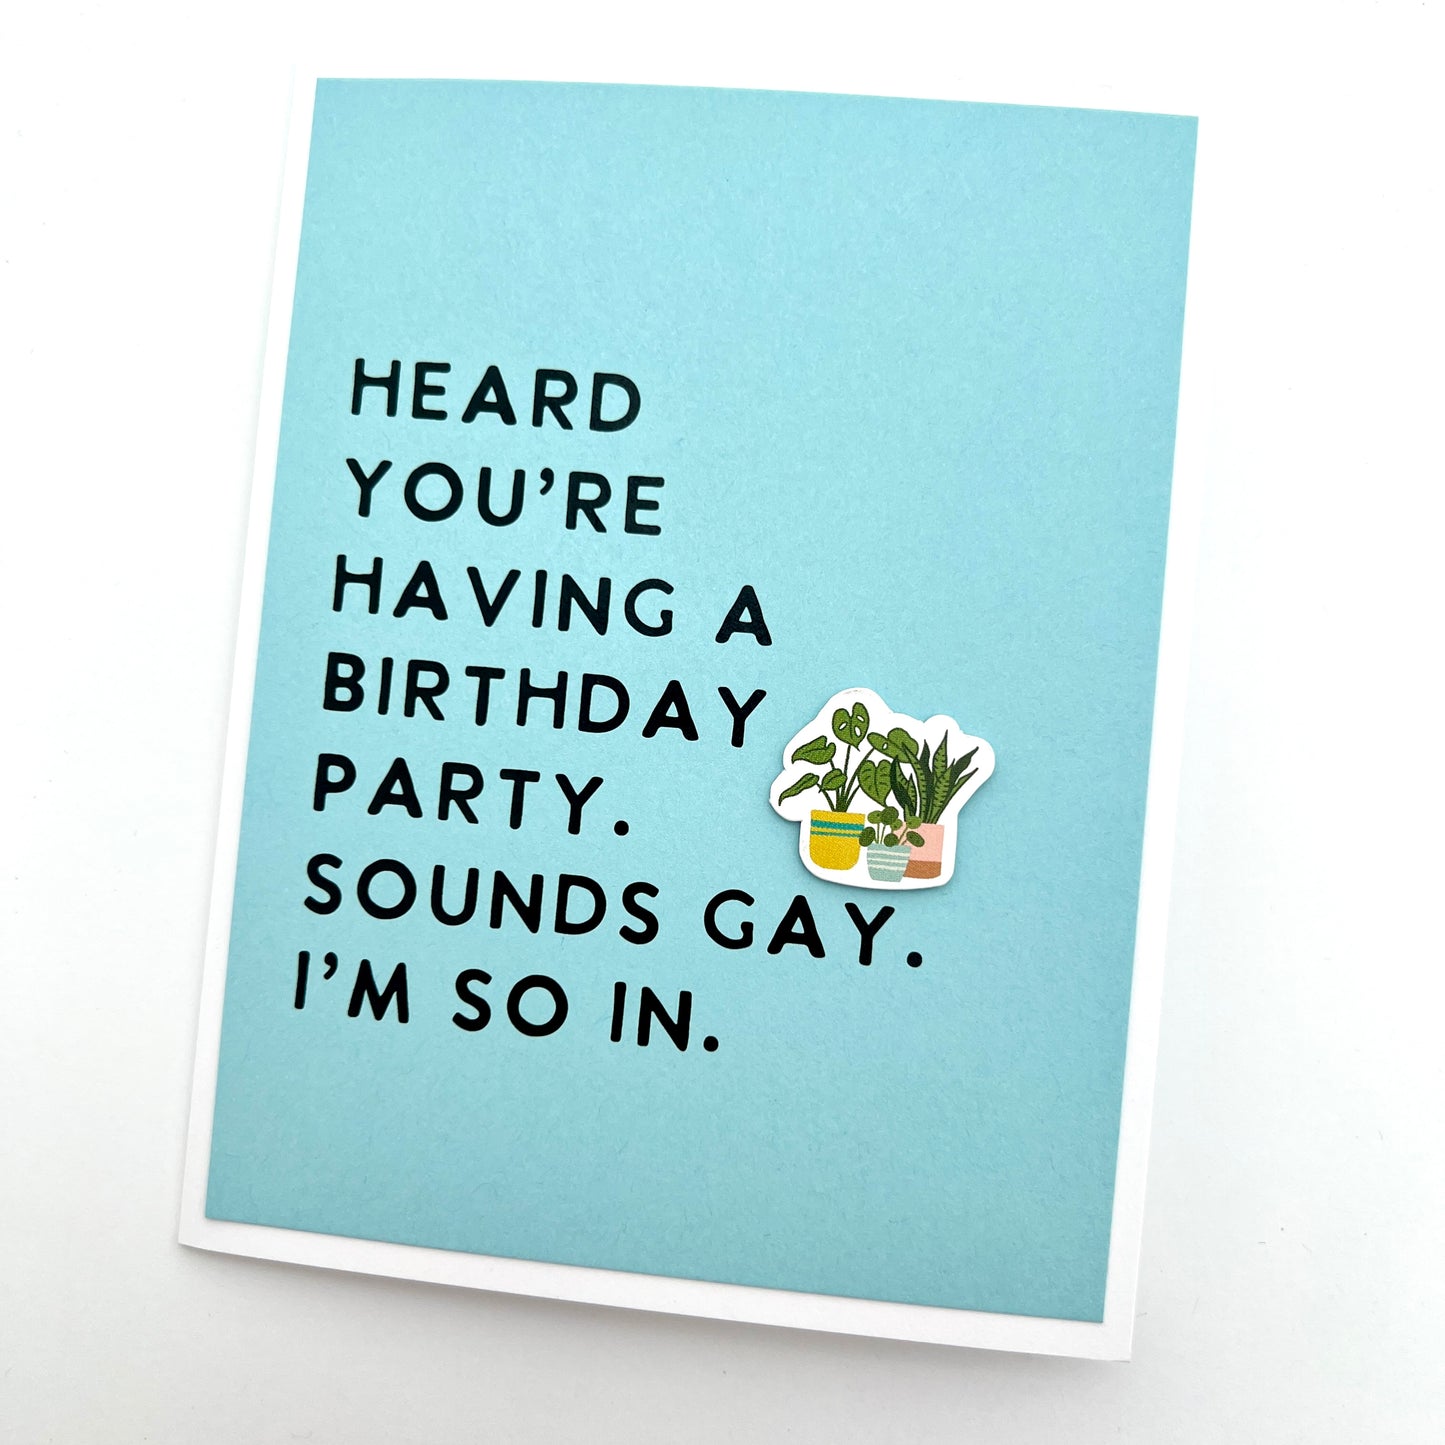 Sounds Gay I’m So In card